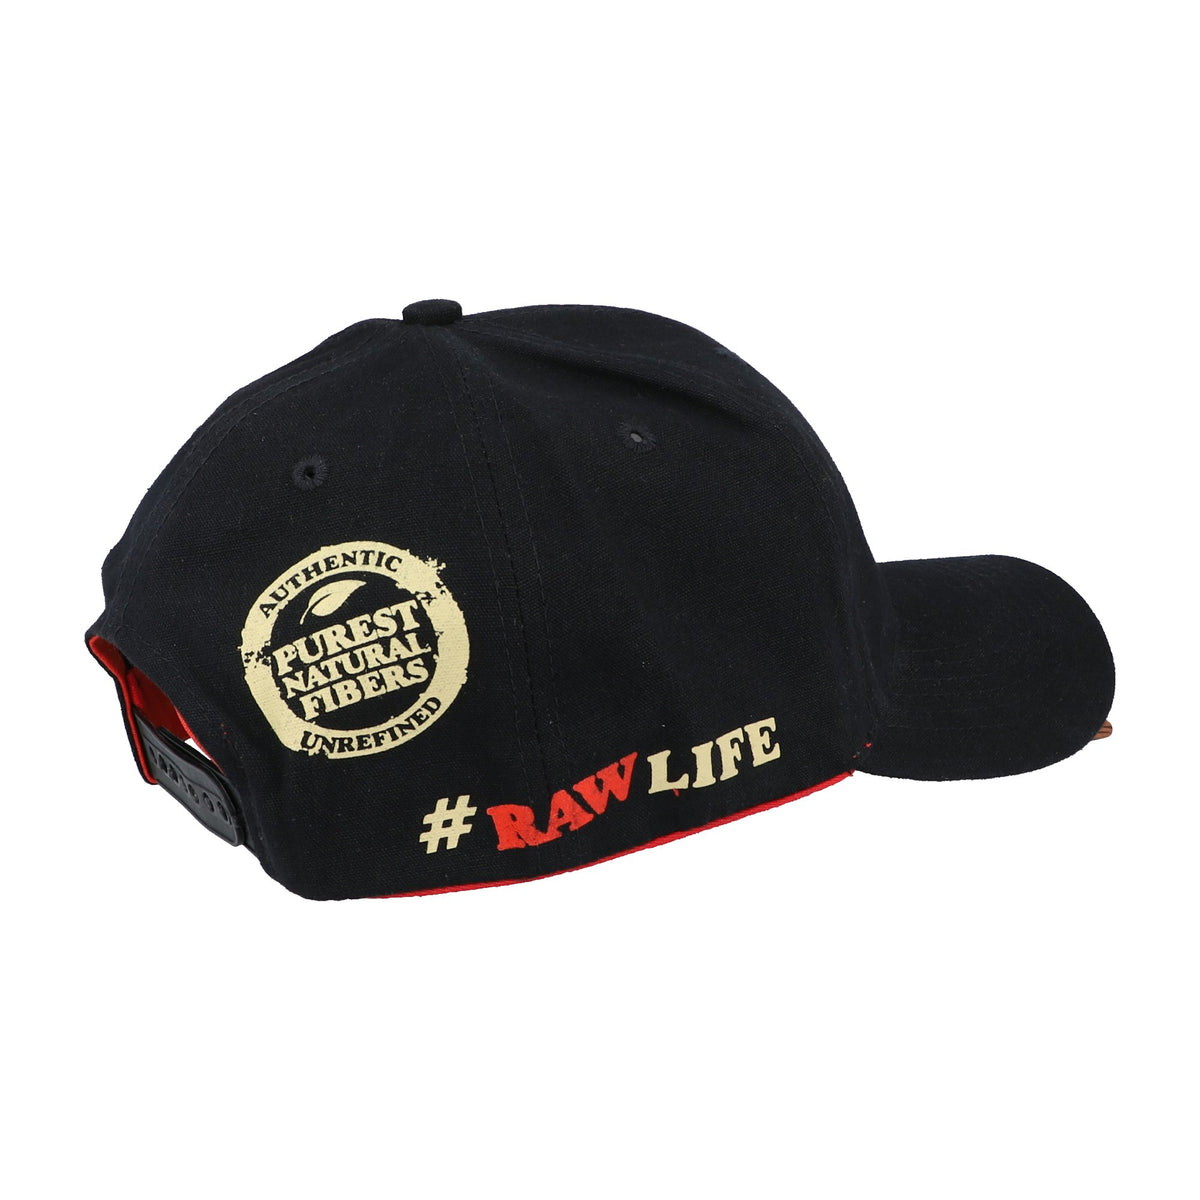 RAW Poker Hat Clothing Accessories WAR00402-MUSA01 esd-official